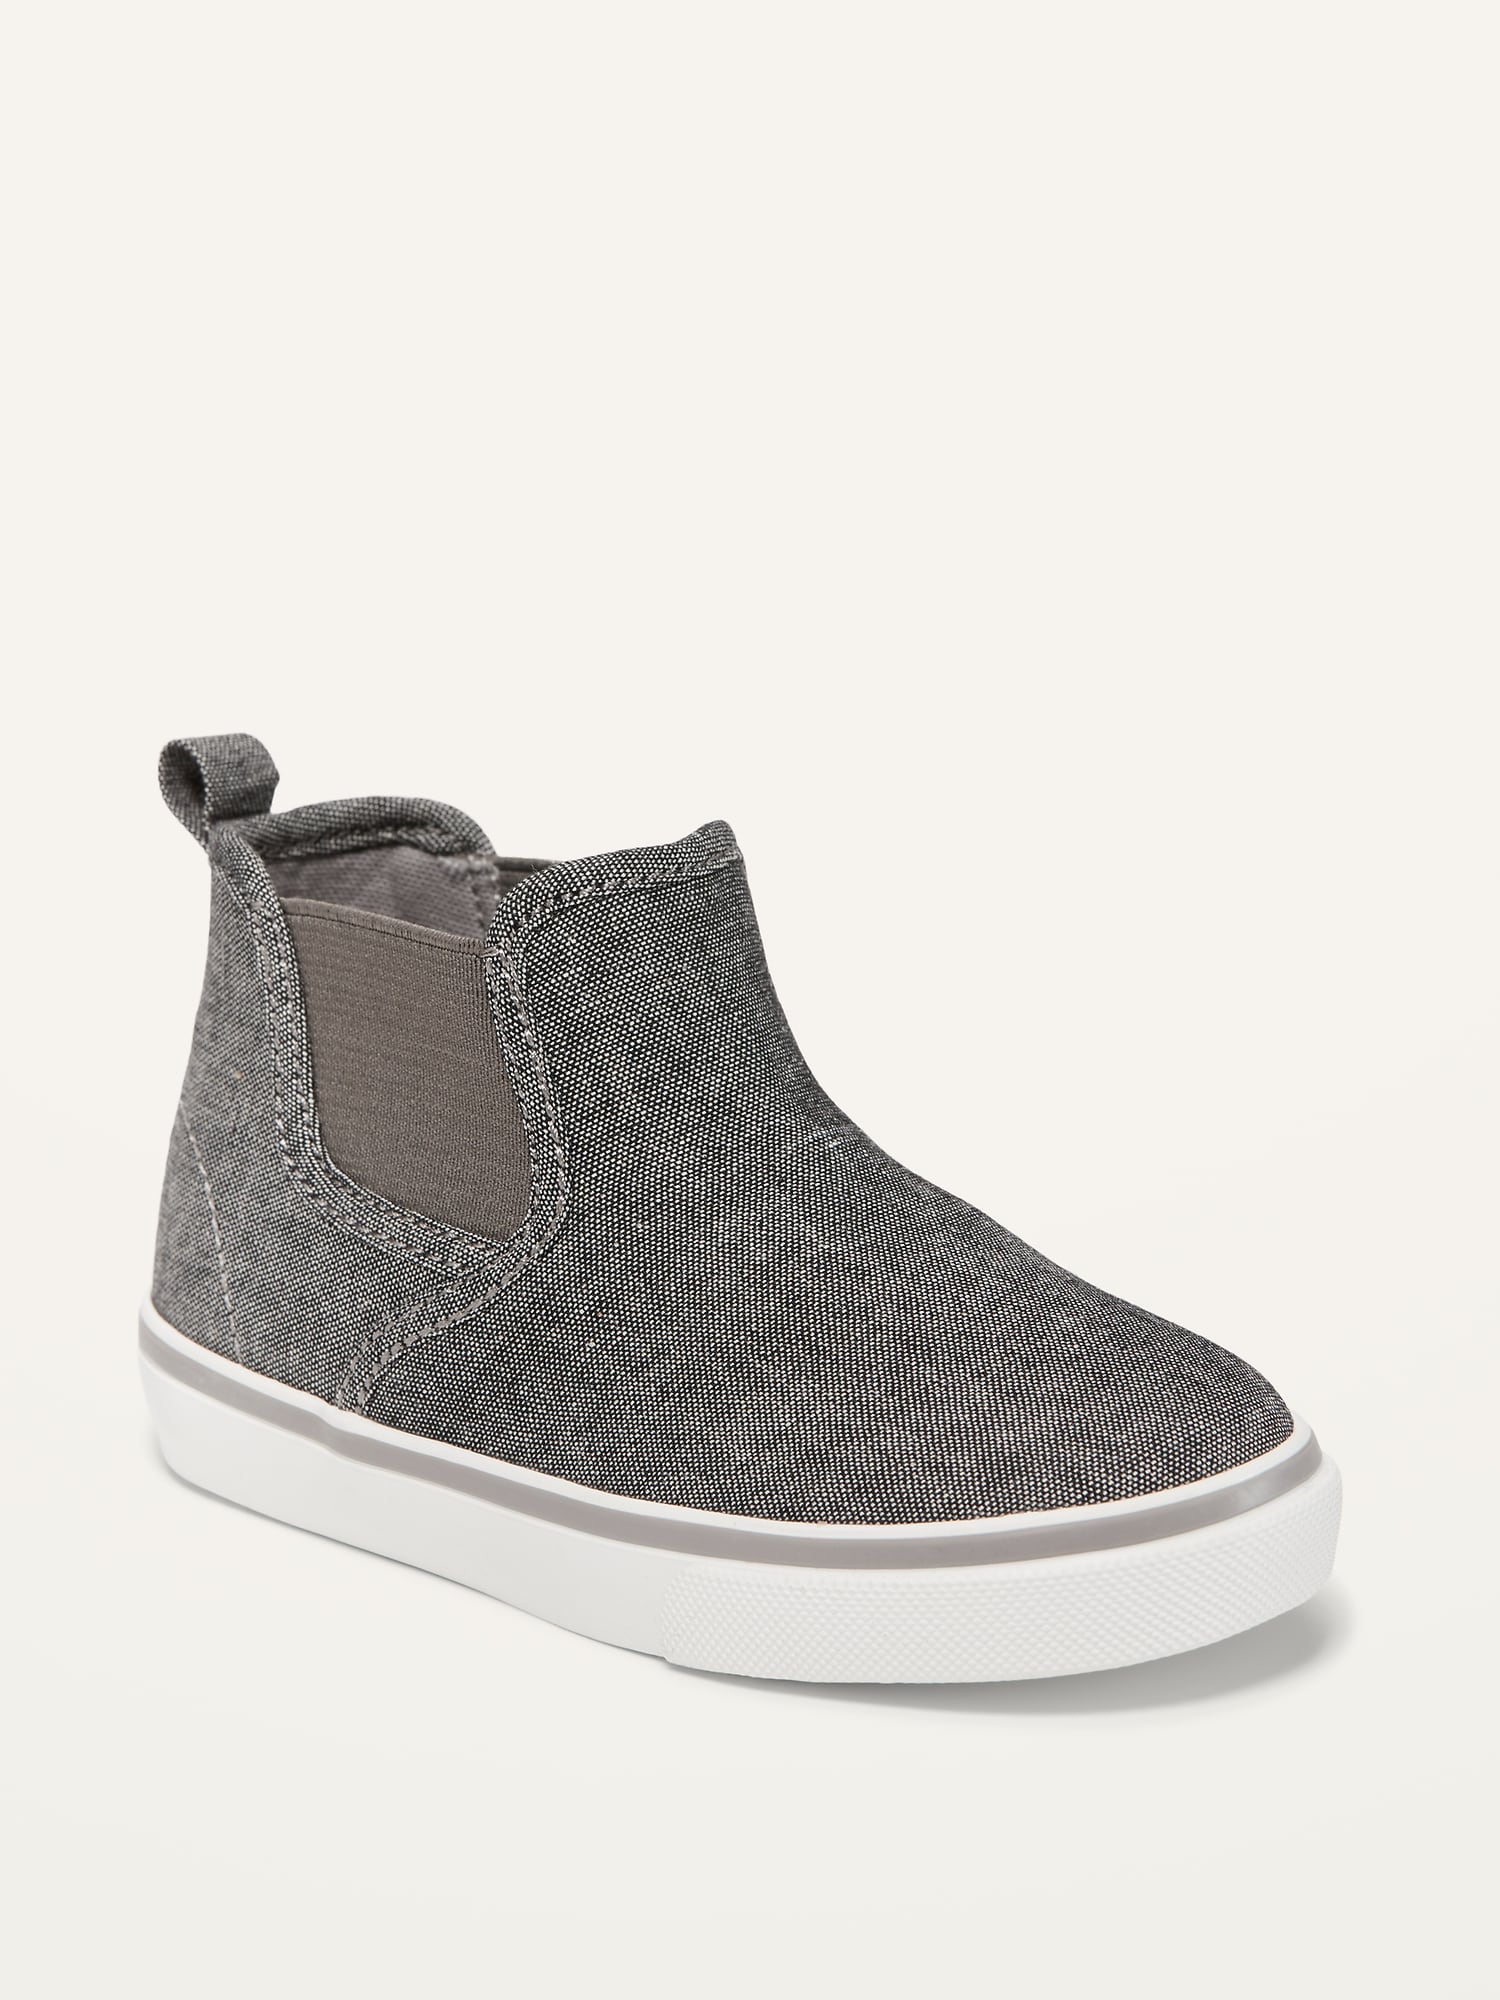 Unisex Chambray Mid-Top Slip-On Sneakers for Toddler | Old Navy